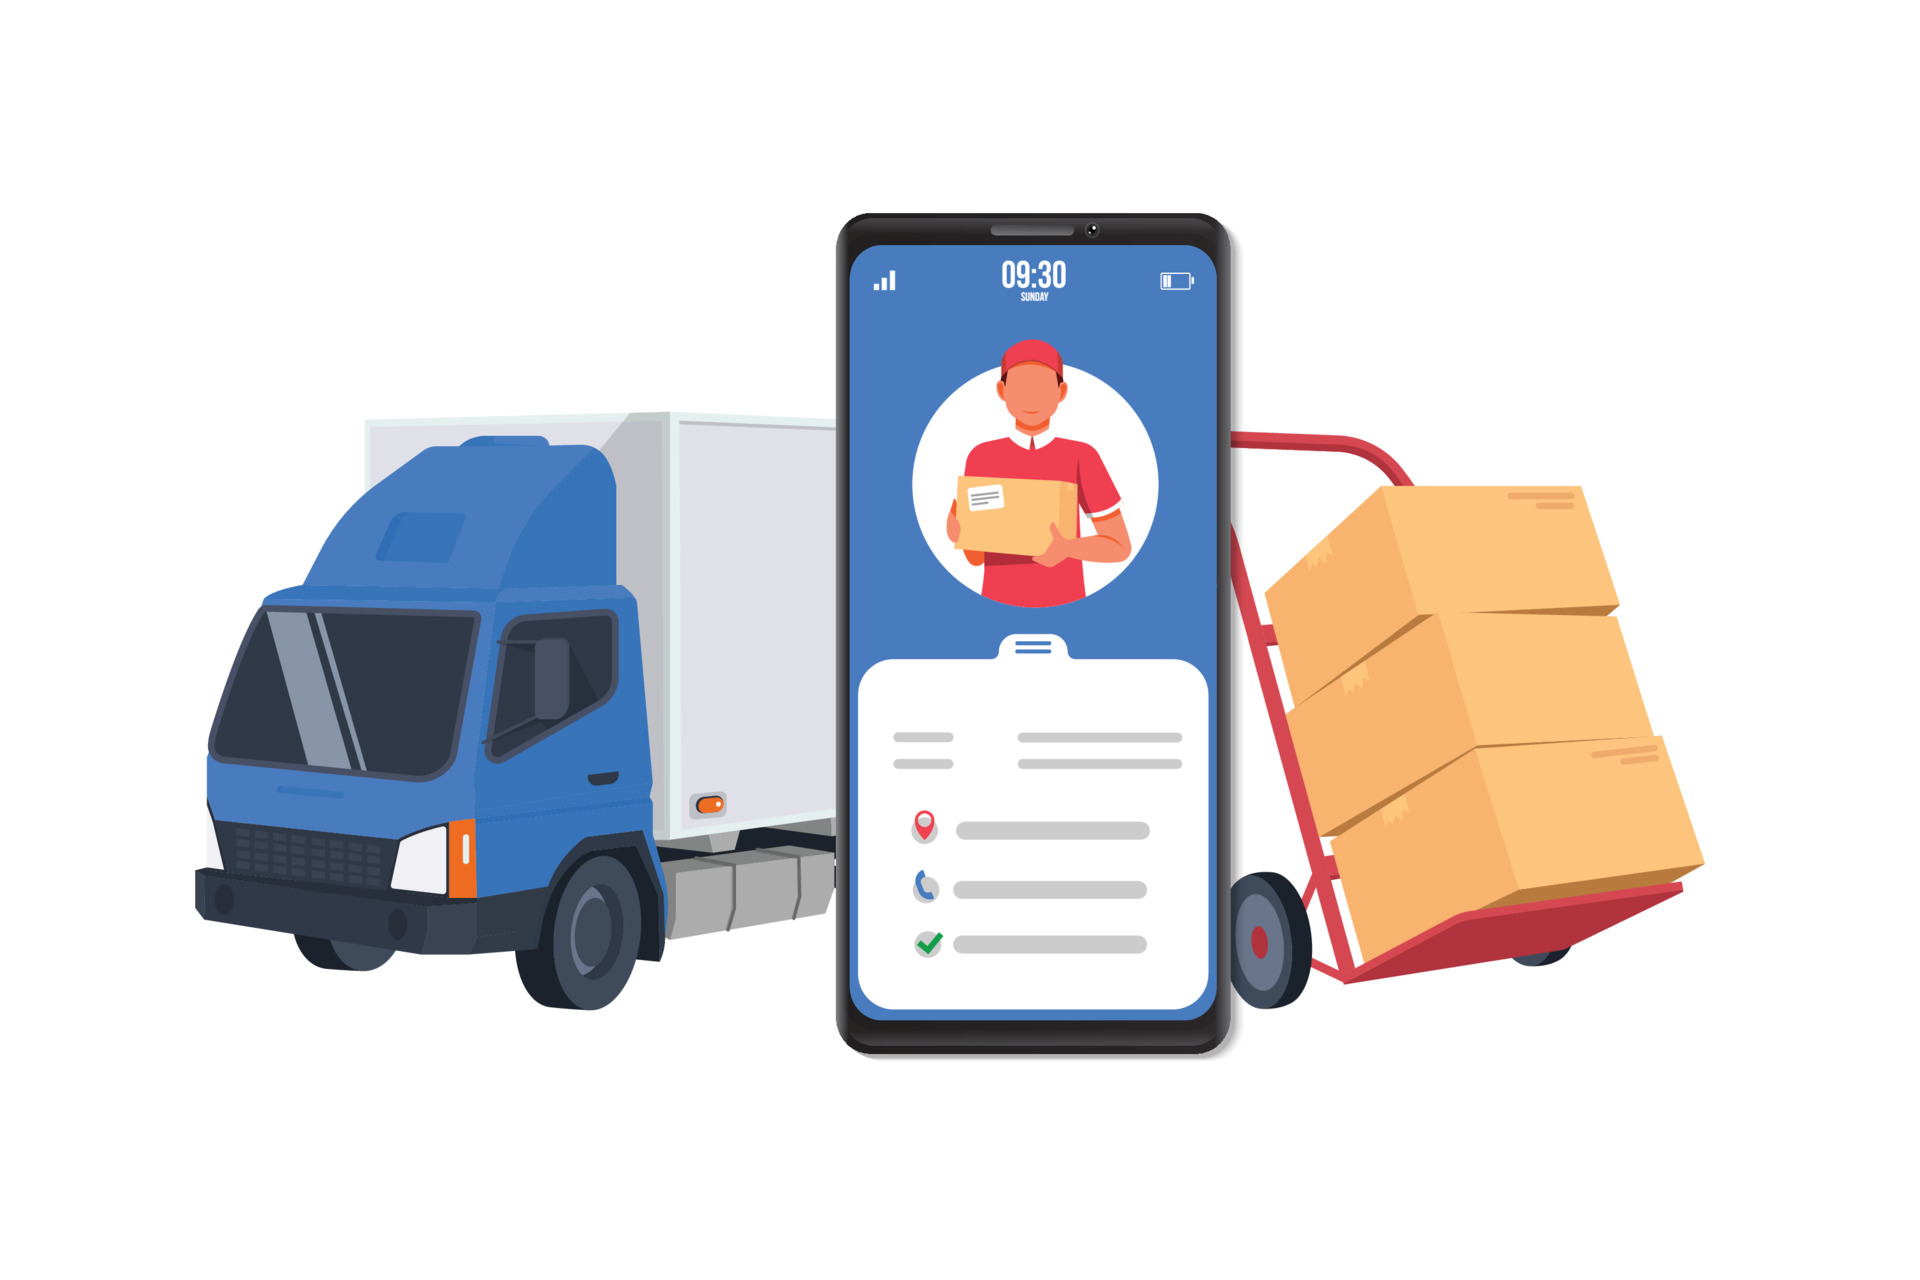 vecteezy_logistic-cargo-mobile-courier-or-freight-delivery-service_7278457